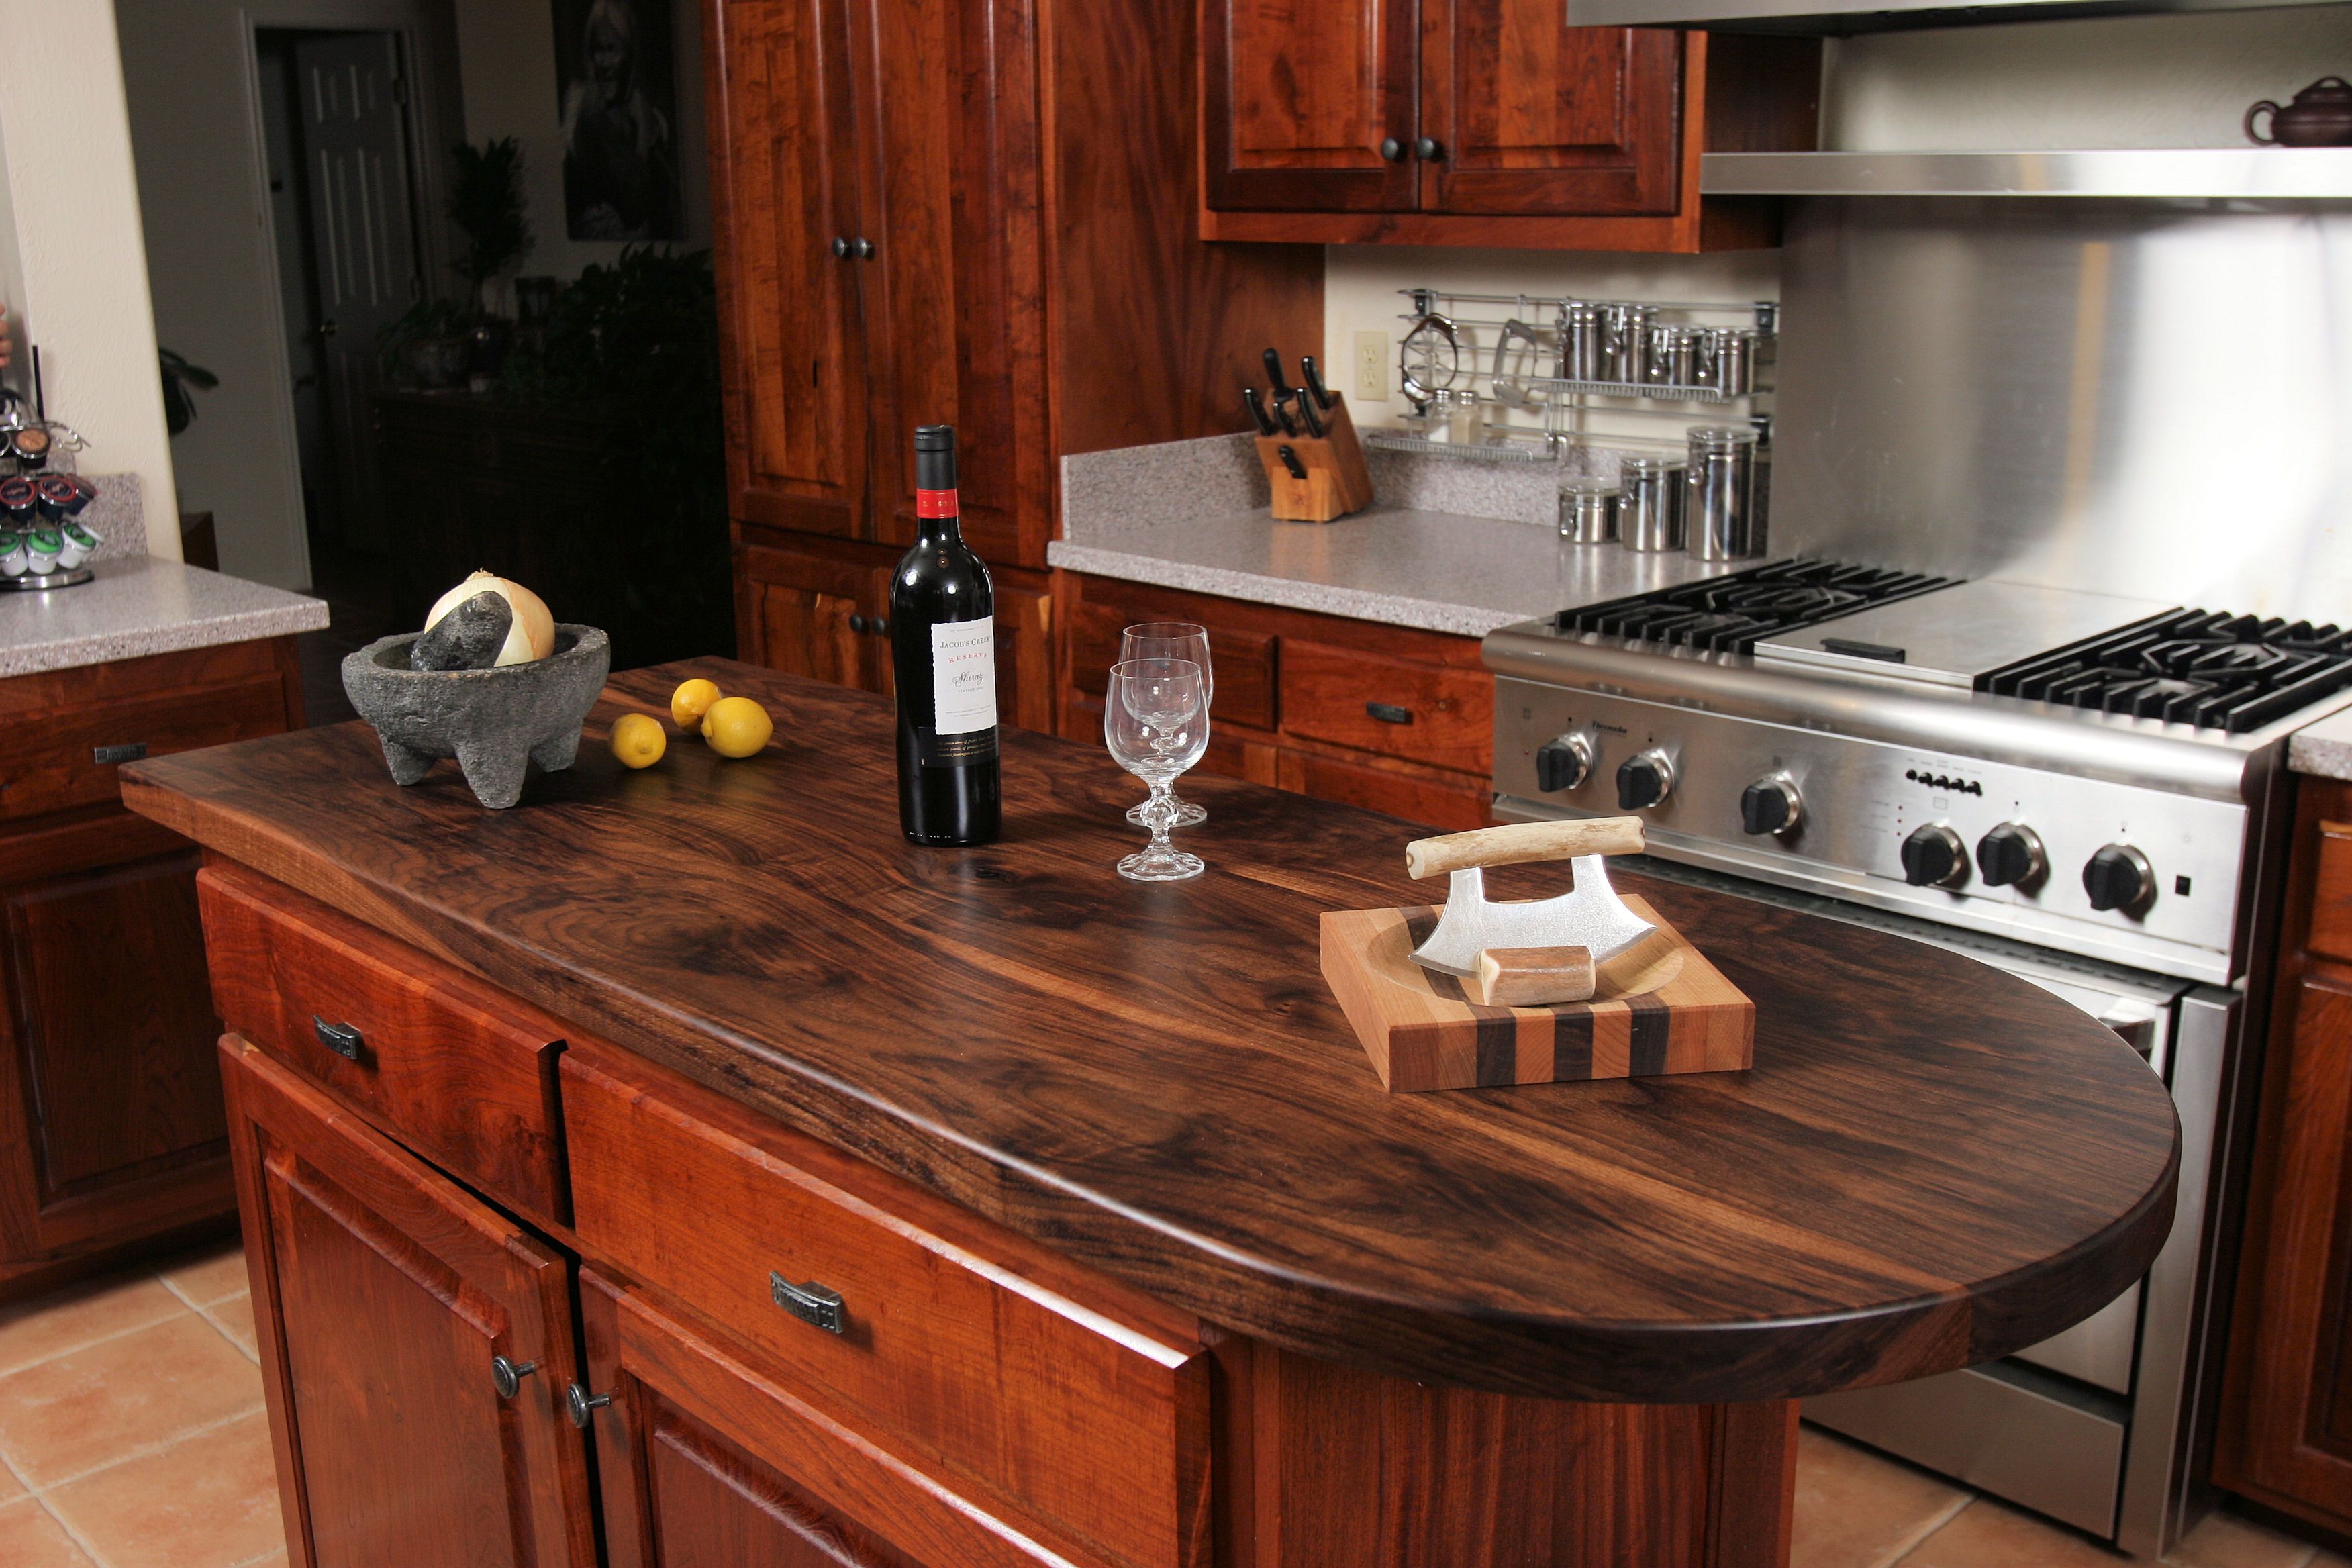 Custom Wood Countertop Options Finishes, How To Make Wood Countertops Food Safe